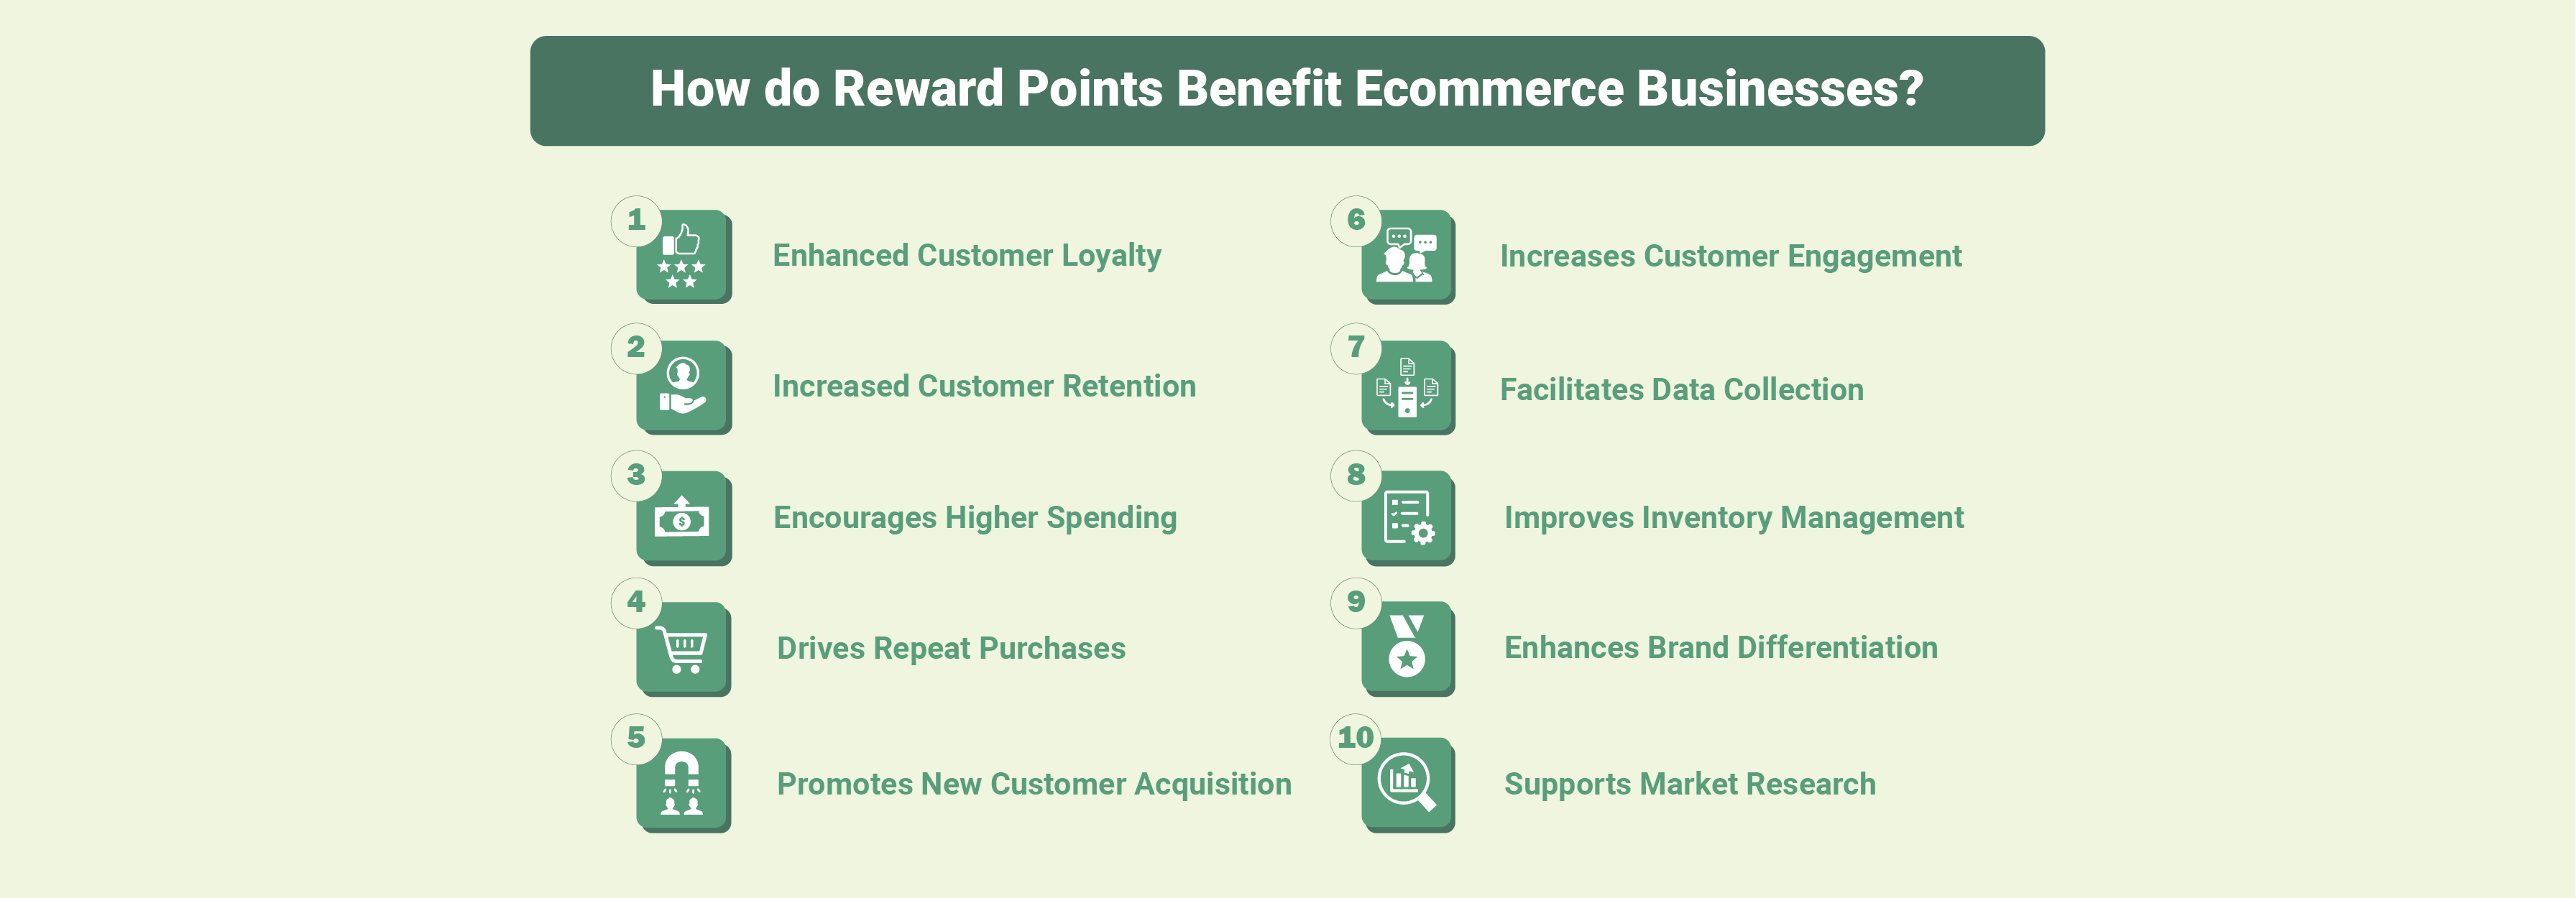 Benefits of reward points in boosting ecommerce business engagement and sales